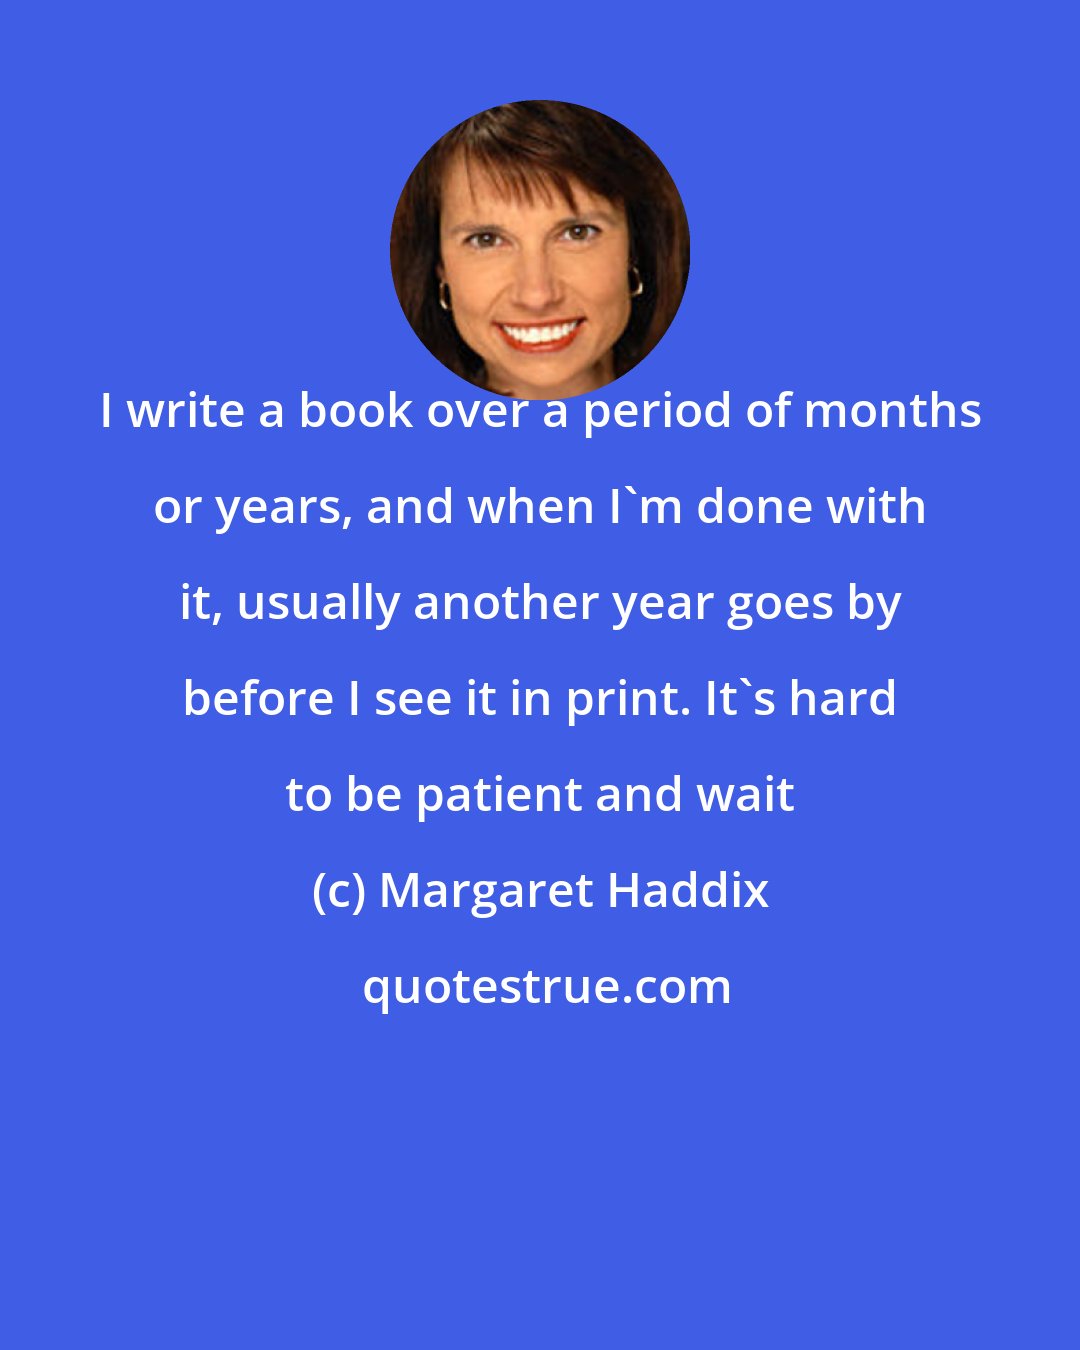 Margaret Haddix: I write a book over a period of months or years, and when I'm done with it, usually another year goes by before I see it in print. It's hard to be patient and wait